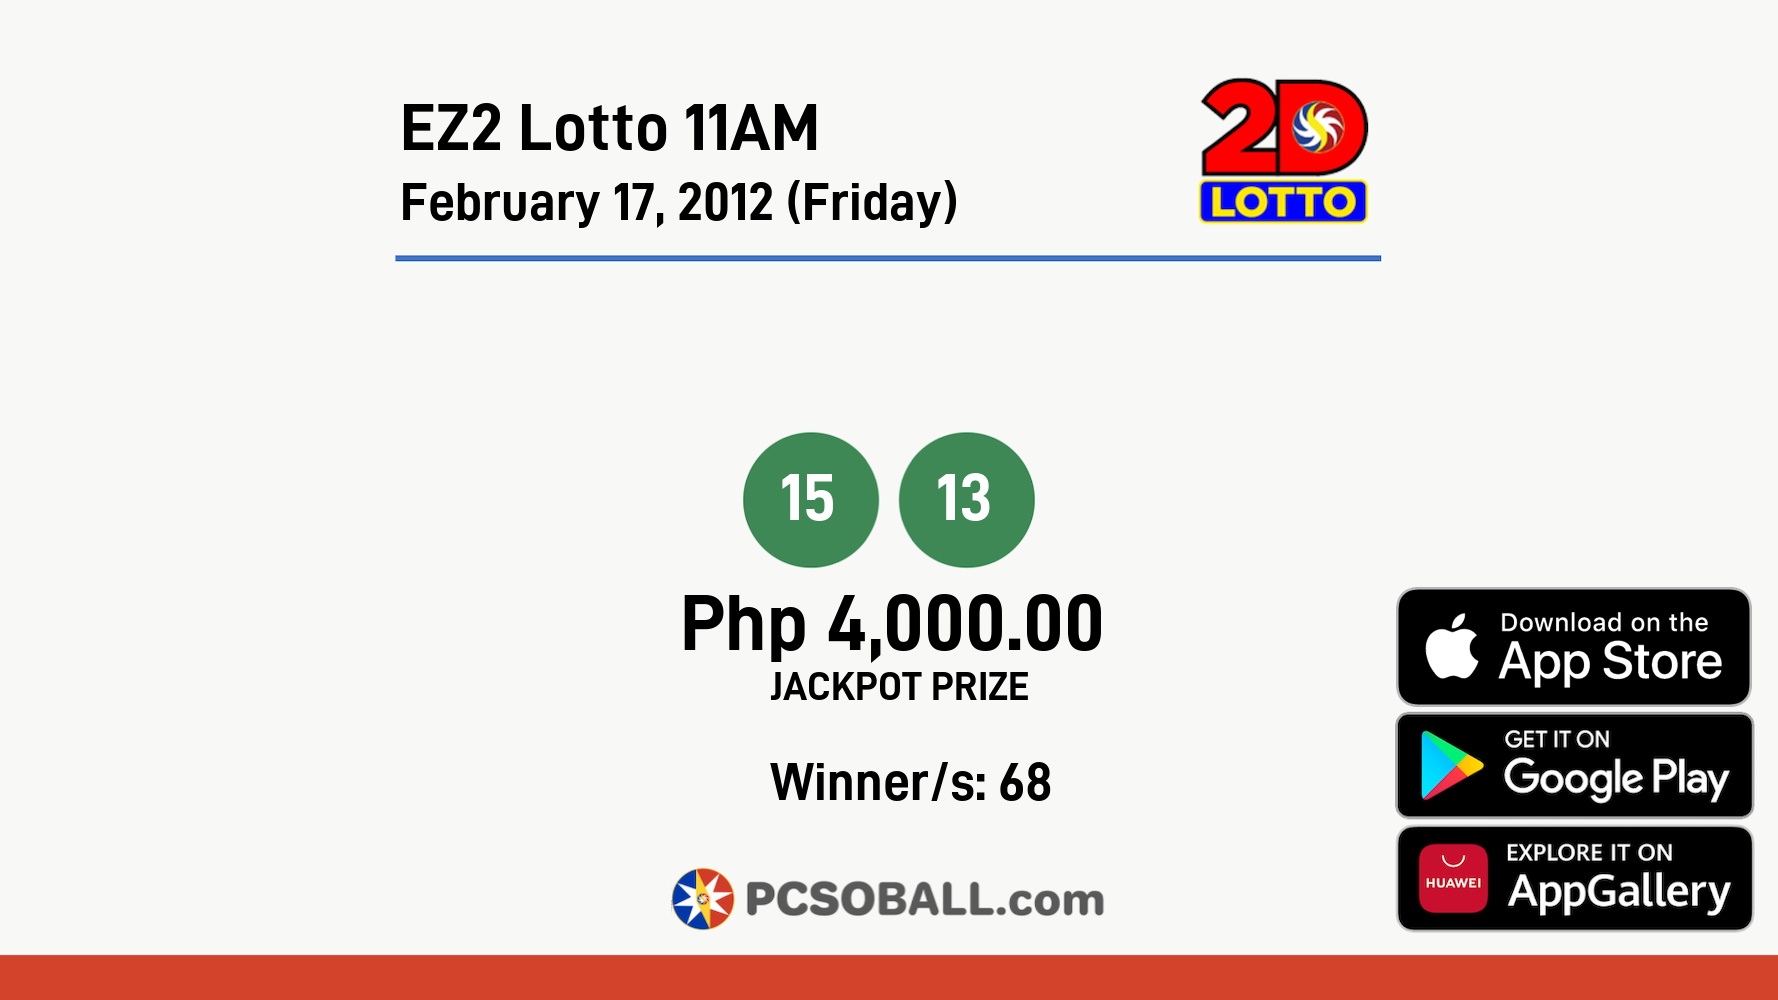 EZ2 Lotto 11AM February 17, 2012 (Friday) Result